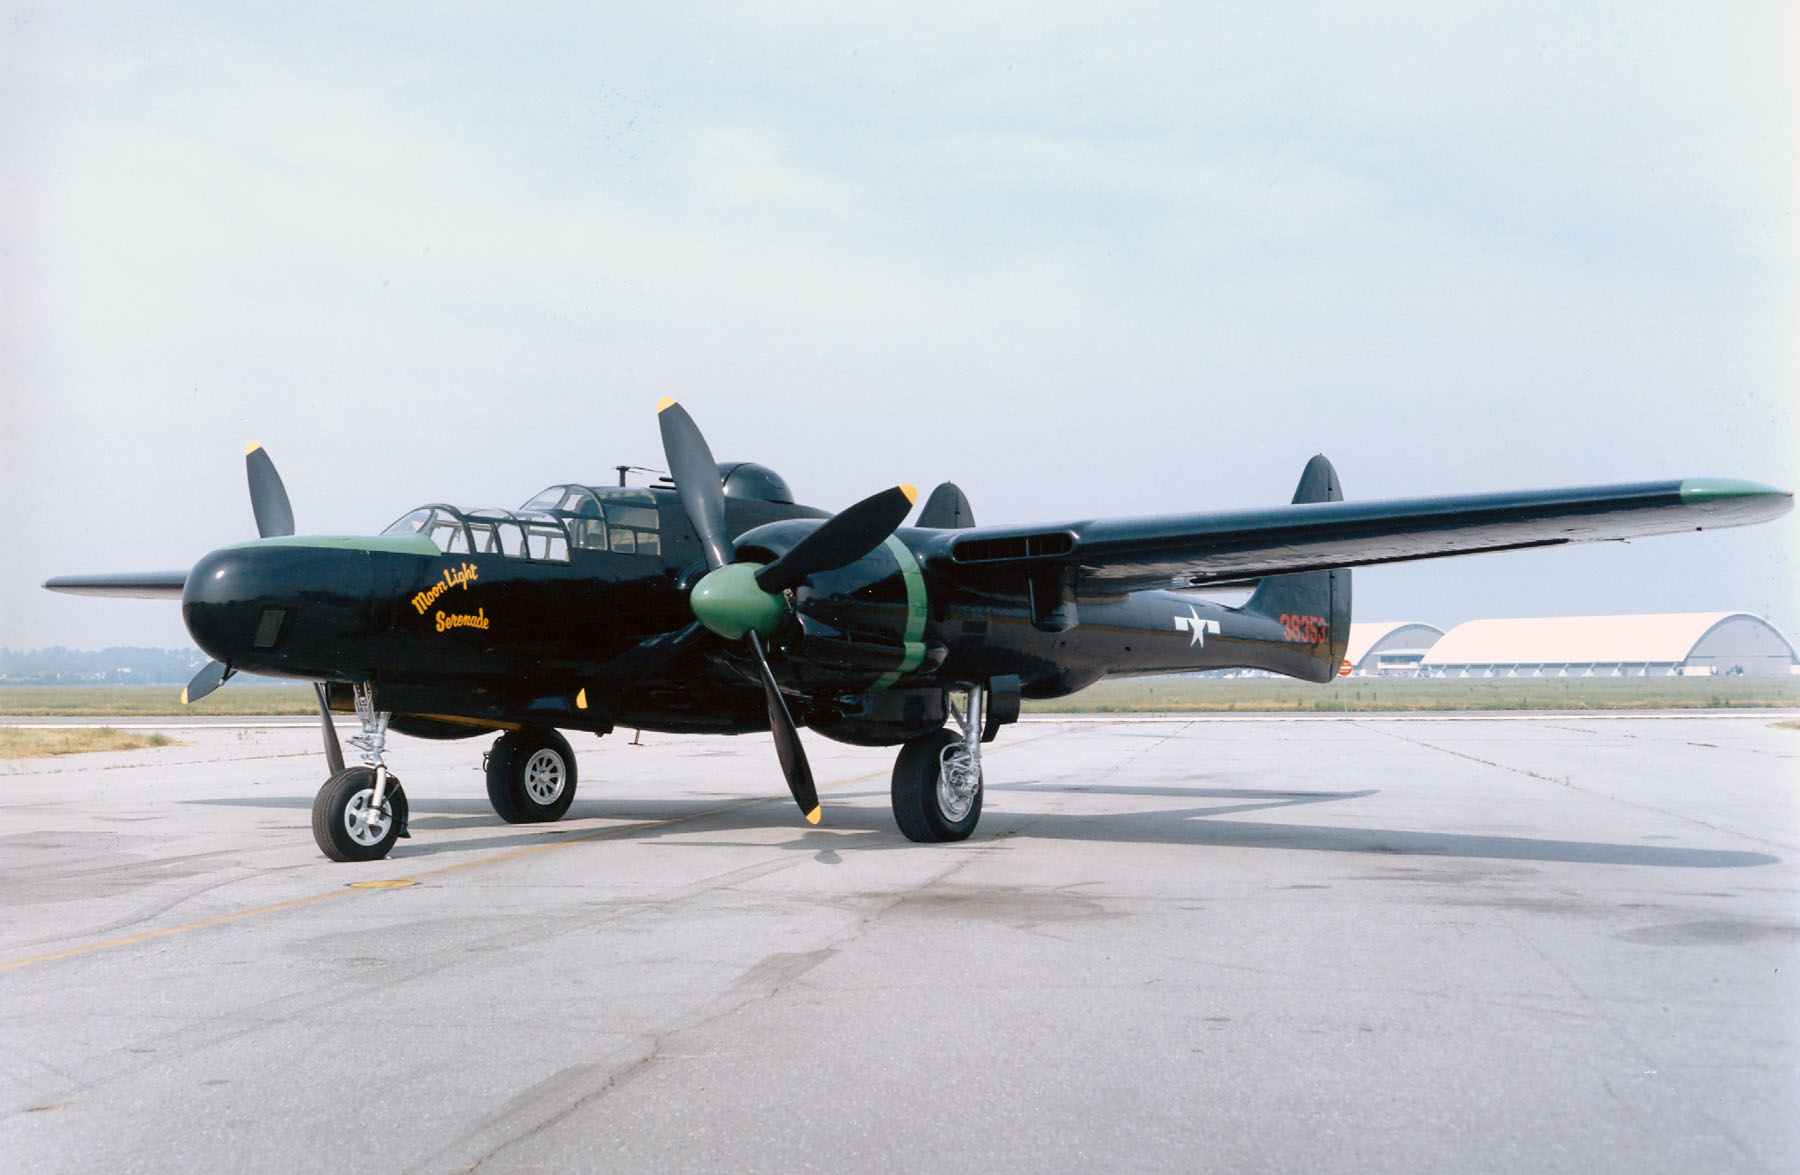 Northrop P-61C-1-NO Black Widow 43-8353 at the National Museum of the United States Air Force. (U.S. Air Force)